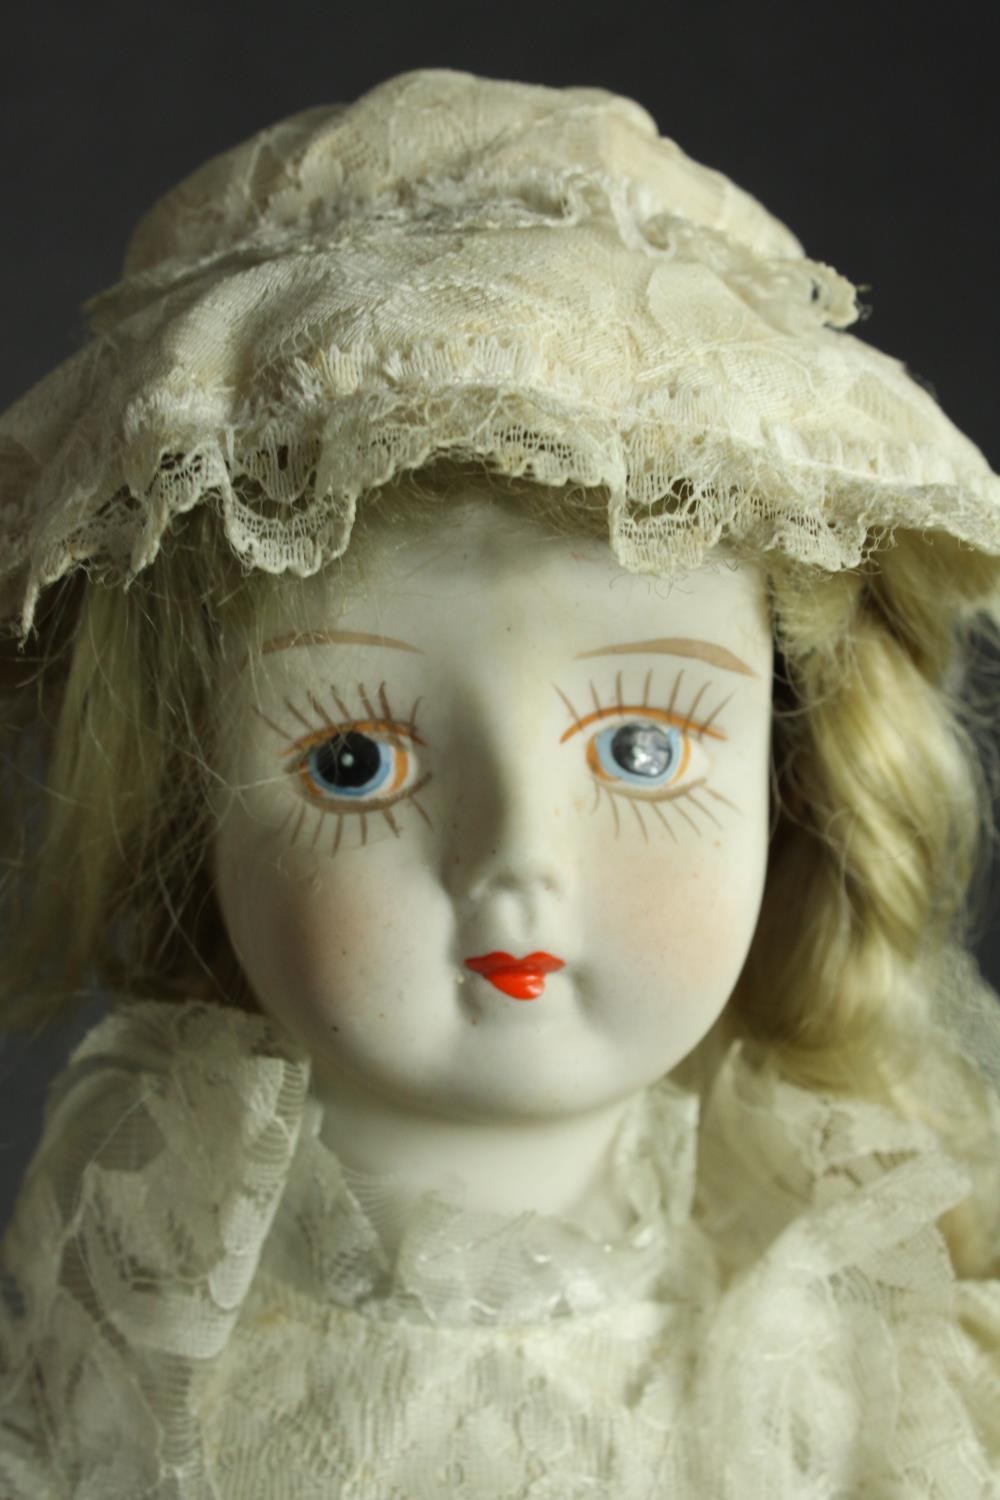 A ceramic bride doll with a hand painted face and lace clothing. Early twentieth century. H.47cm. - Image 2 of 5